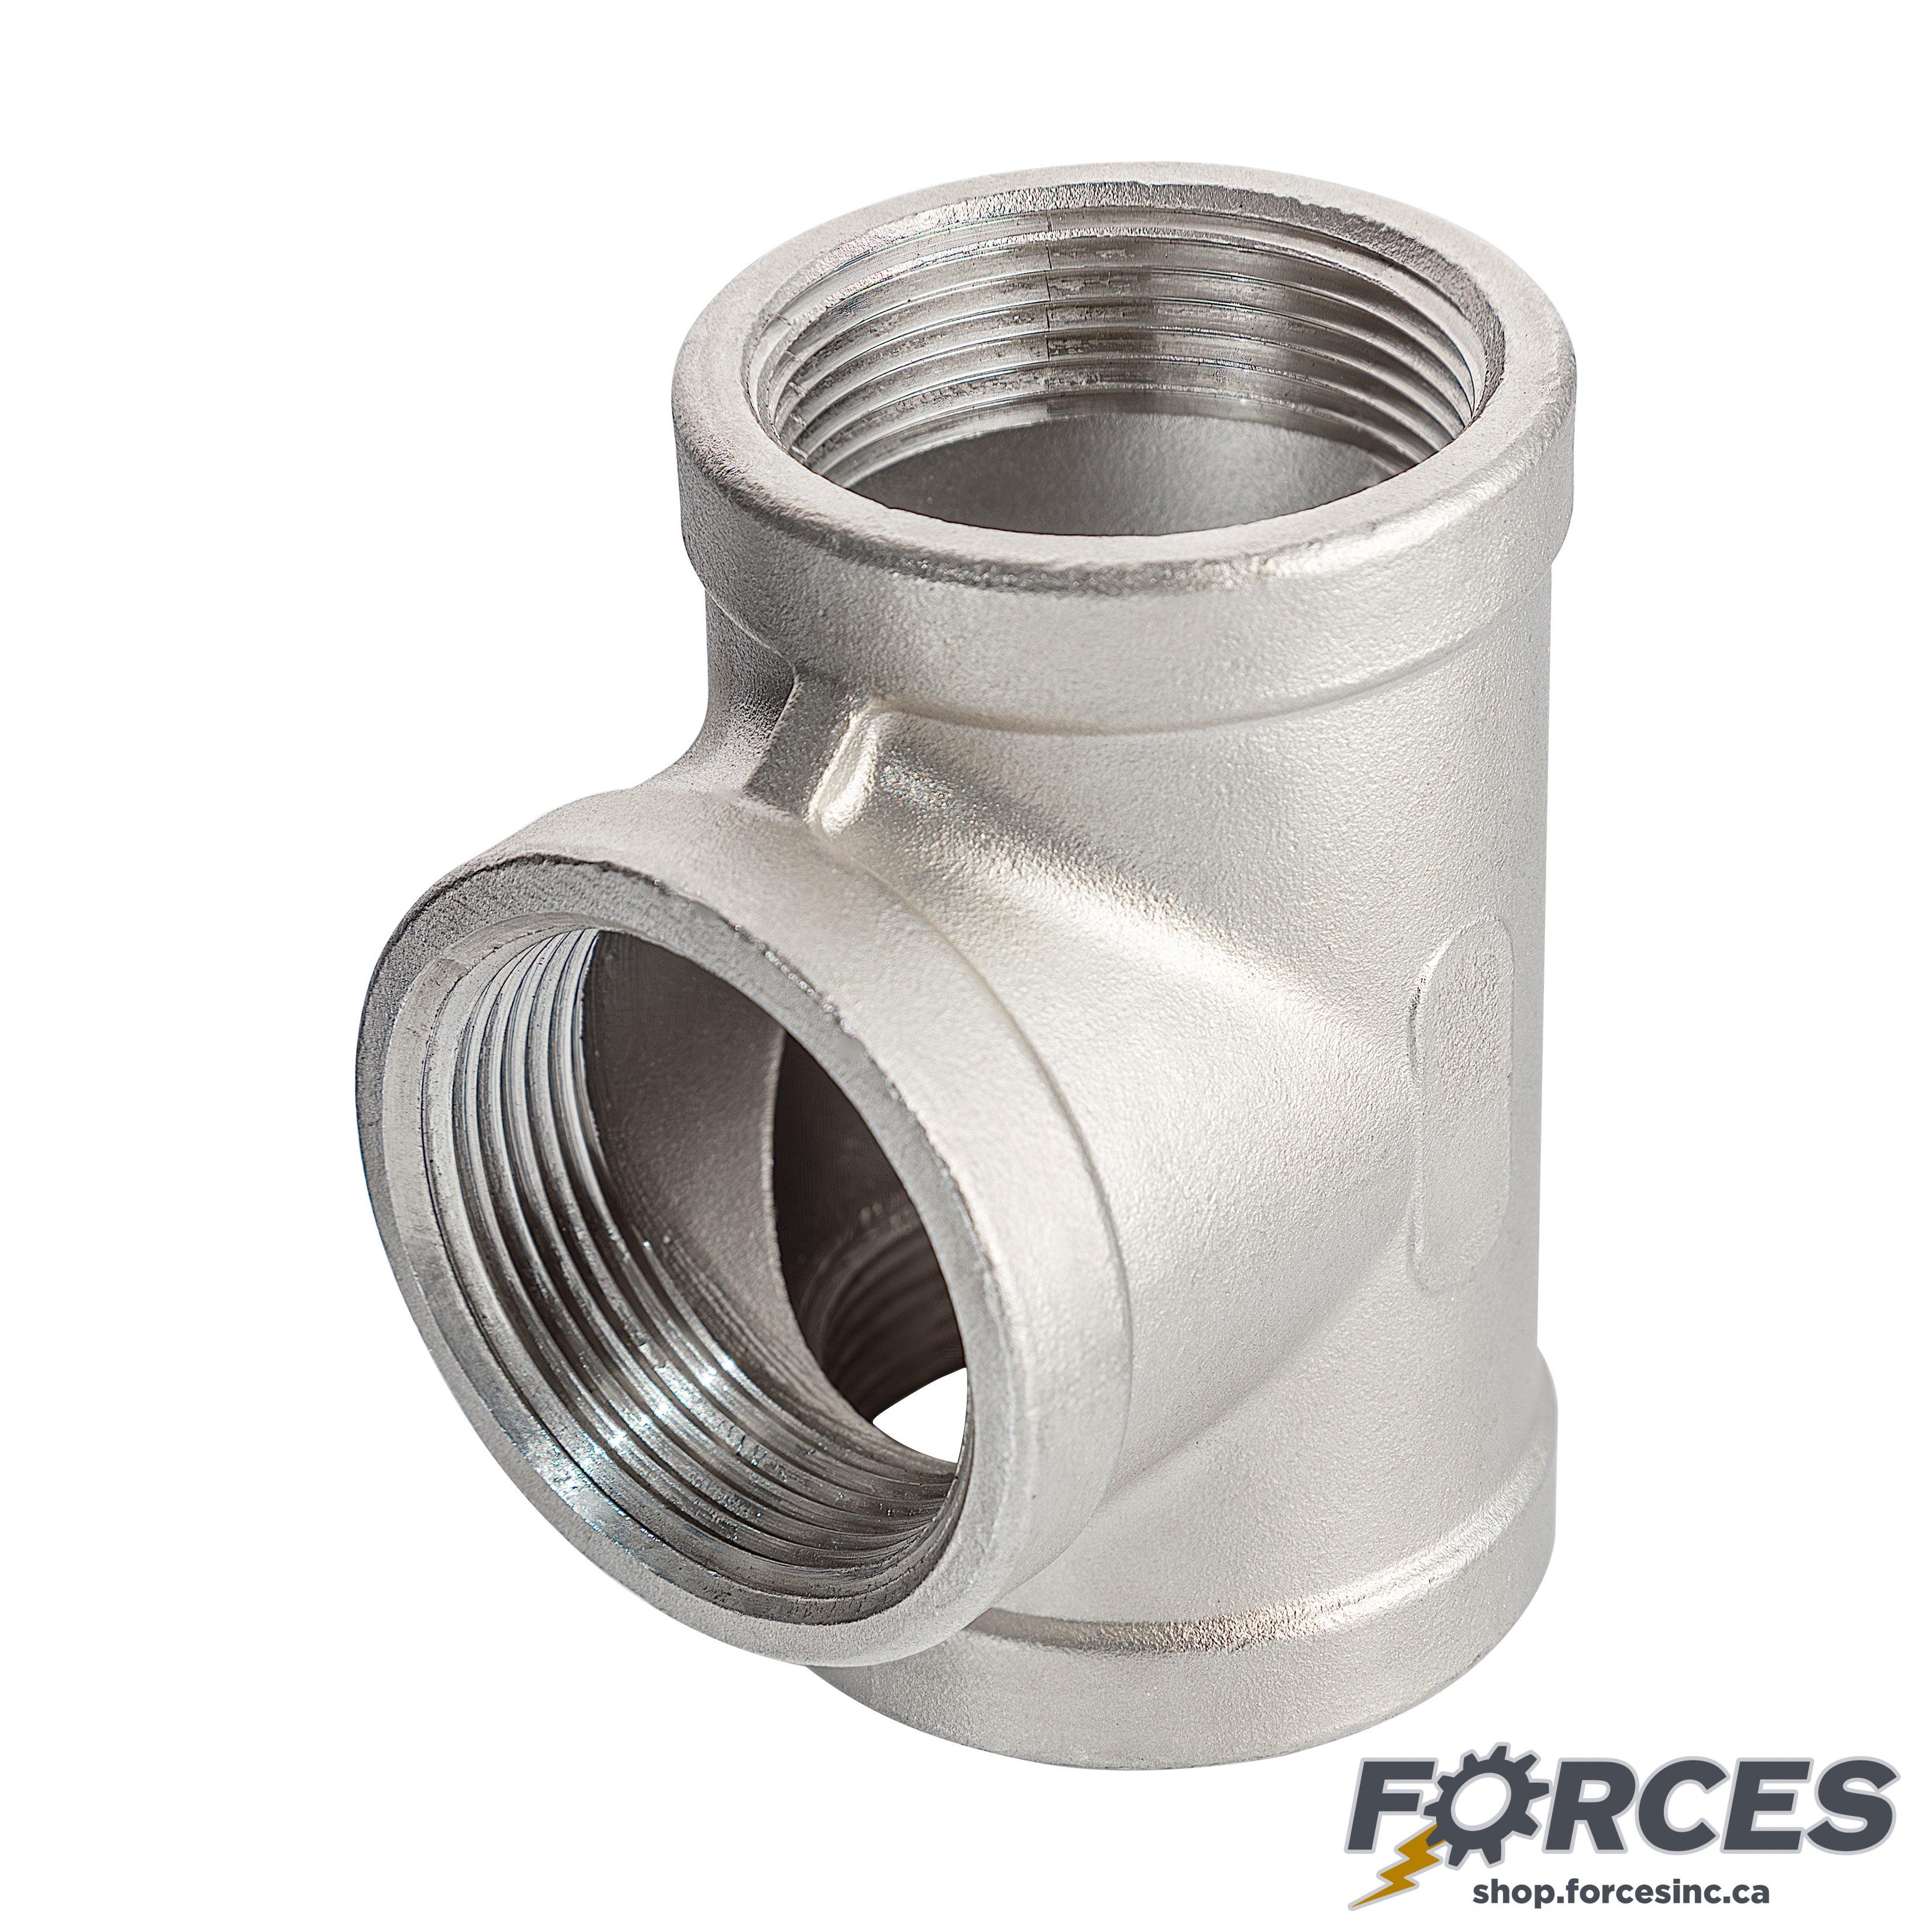 3" Tee NPT #150 - Stainless Steel 316 - Forces Inc